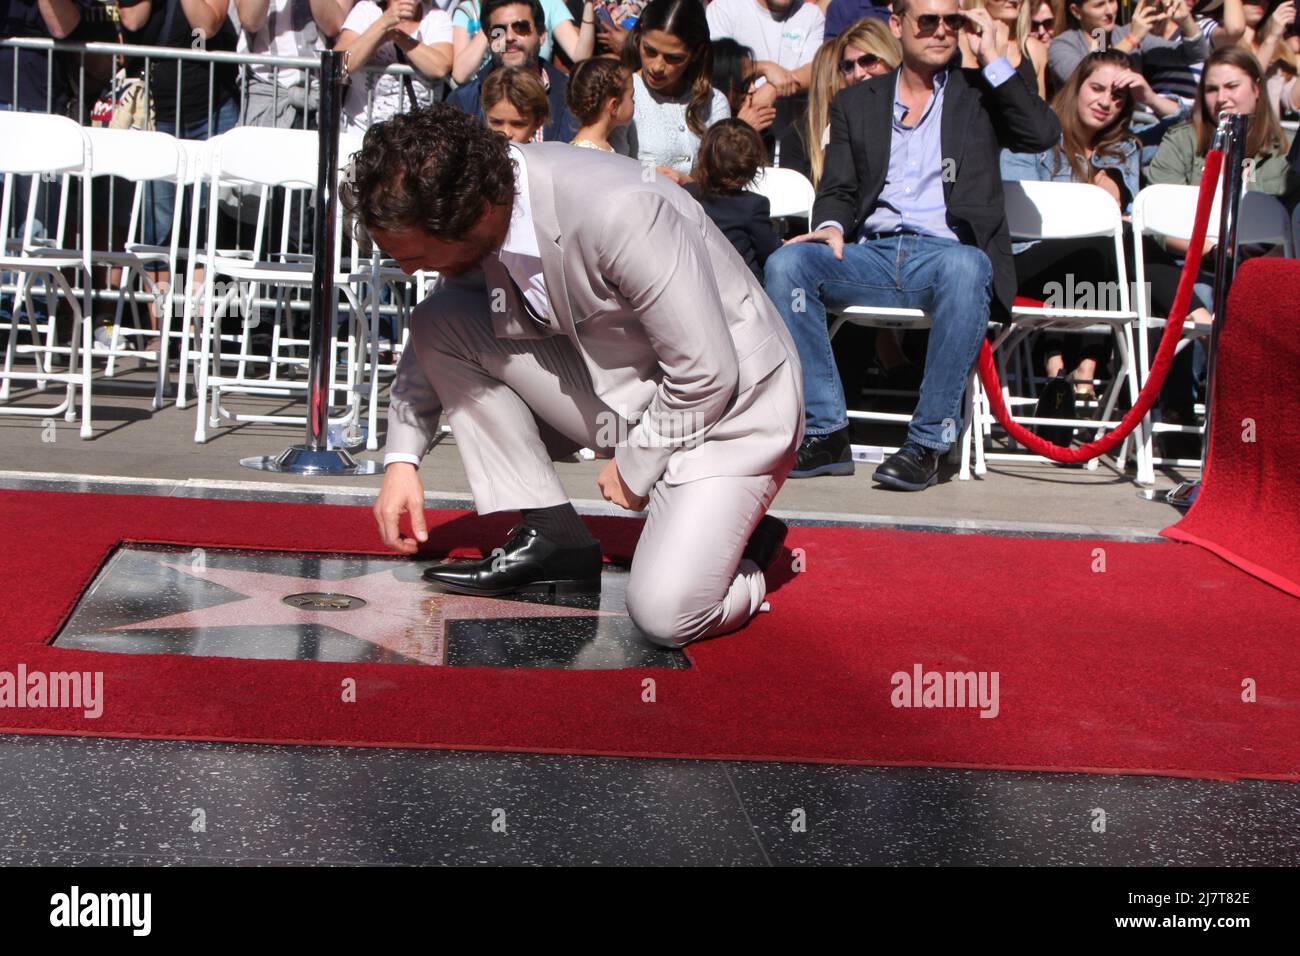 LOS ANGELES - NOV 17:  Matthew McConaughey at the Matthew McConaughey Hollywood Walk of Fame Star Ceremony at the Hollywood & Highland on November 17, 2014 in Los Angeles, CA Stock Photo